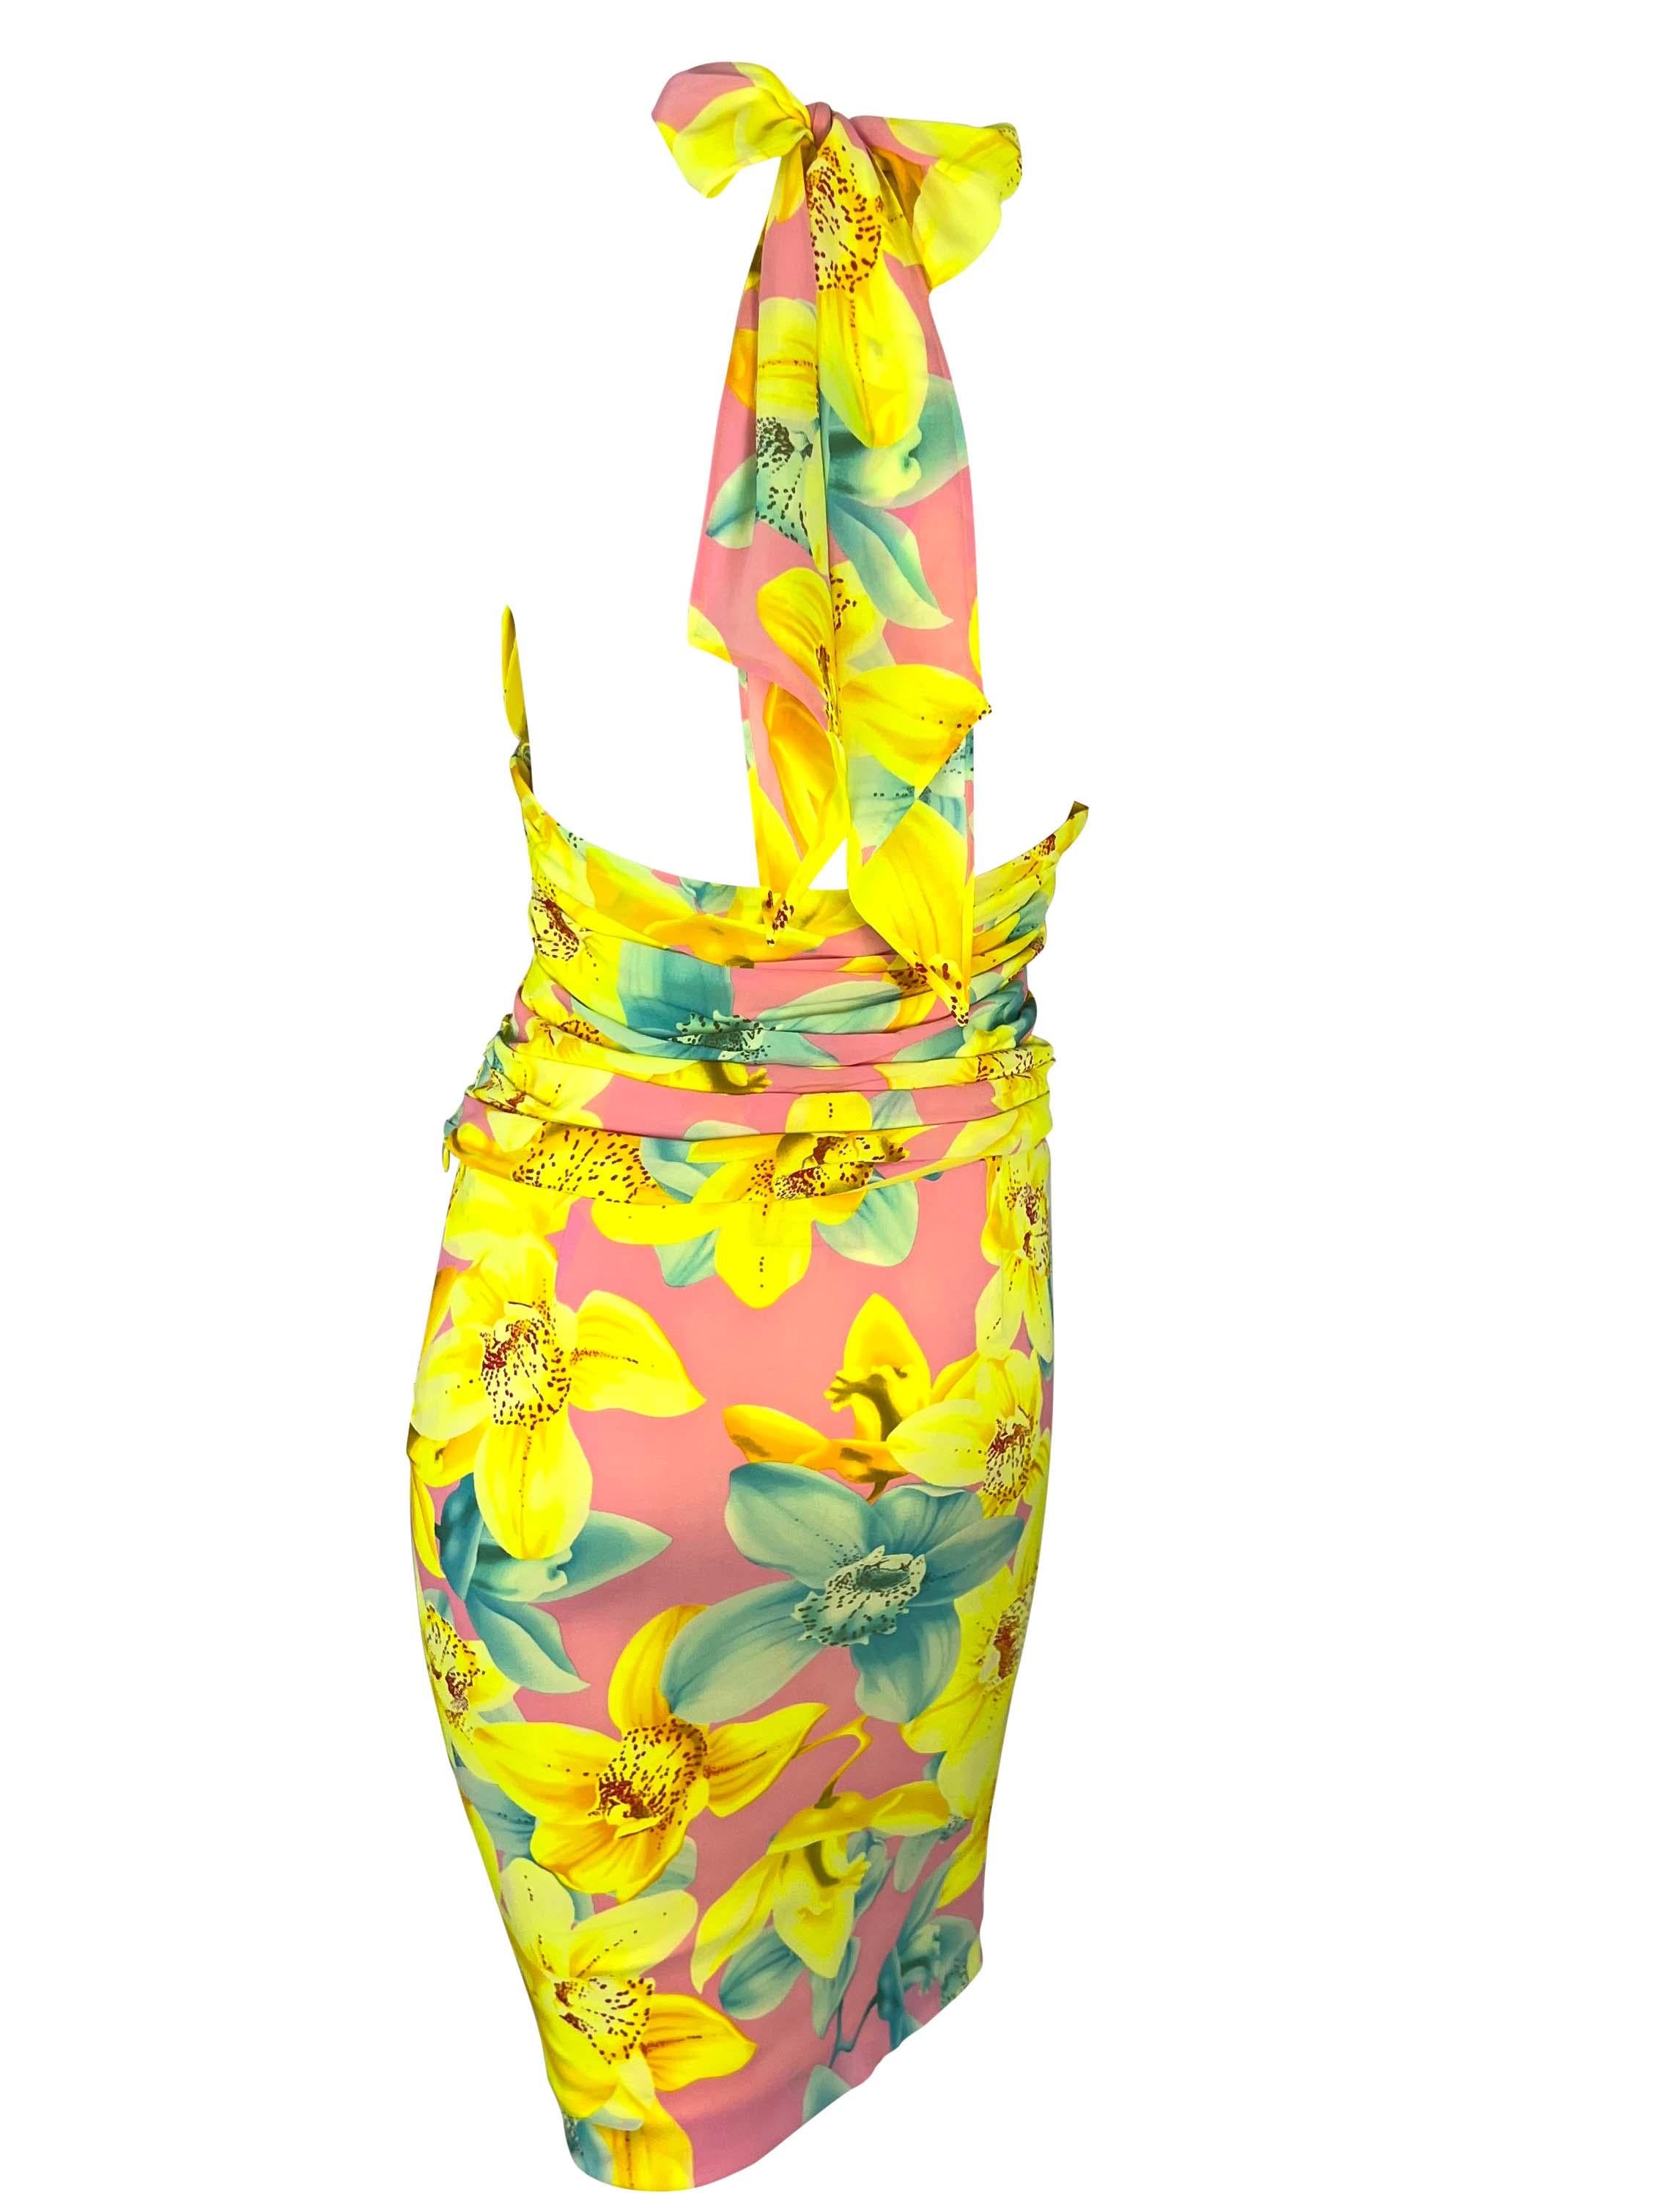 S/S 2004 Versace by Donatella Runway Neon Pink Floral Halter Top Skirt Set In Good Condition For Sale In West Hollywood, CA